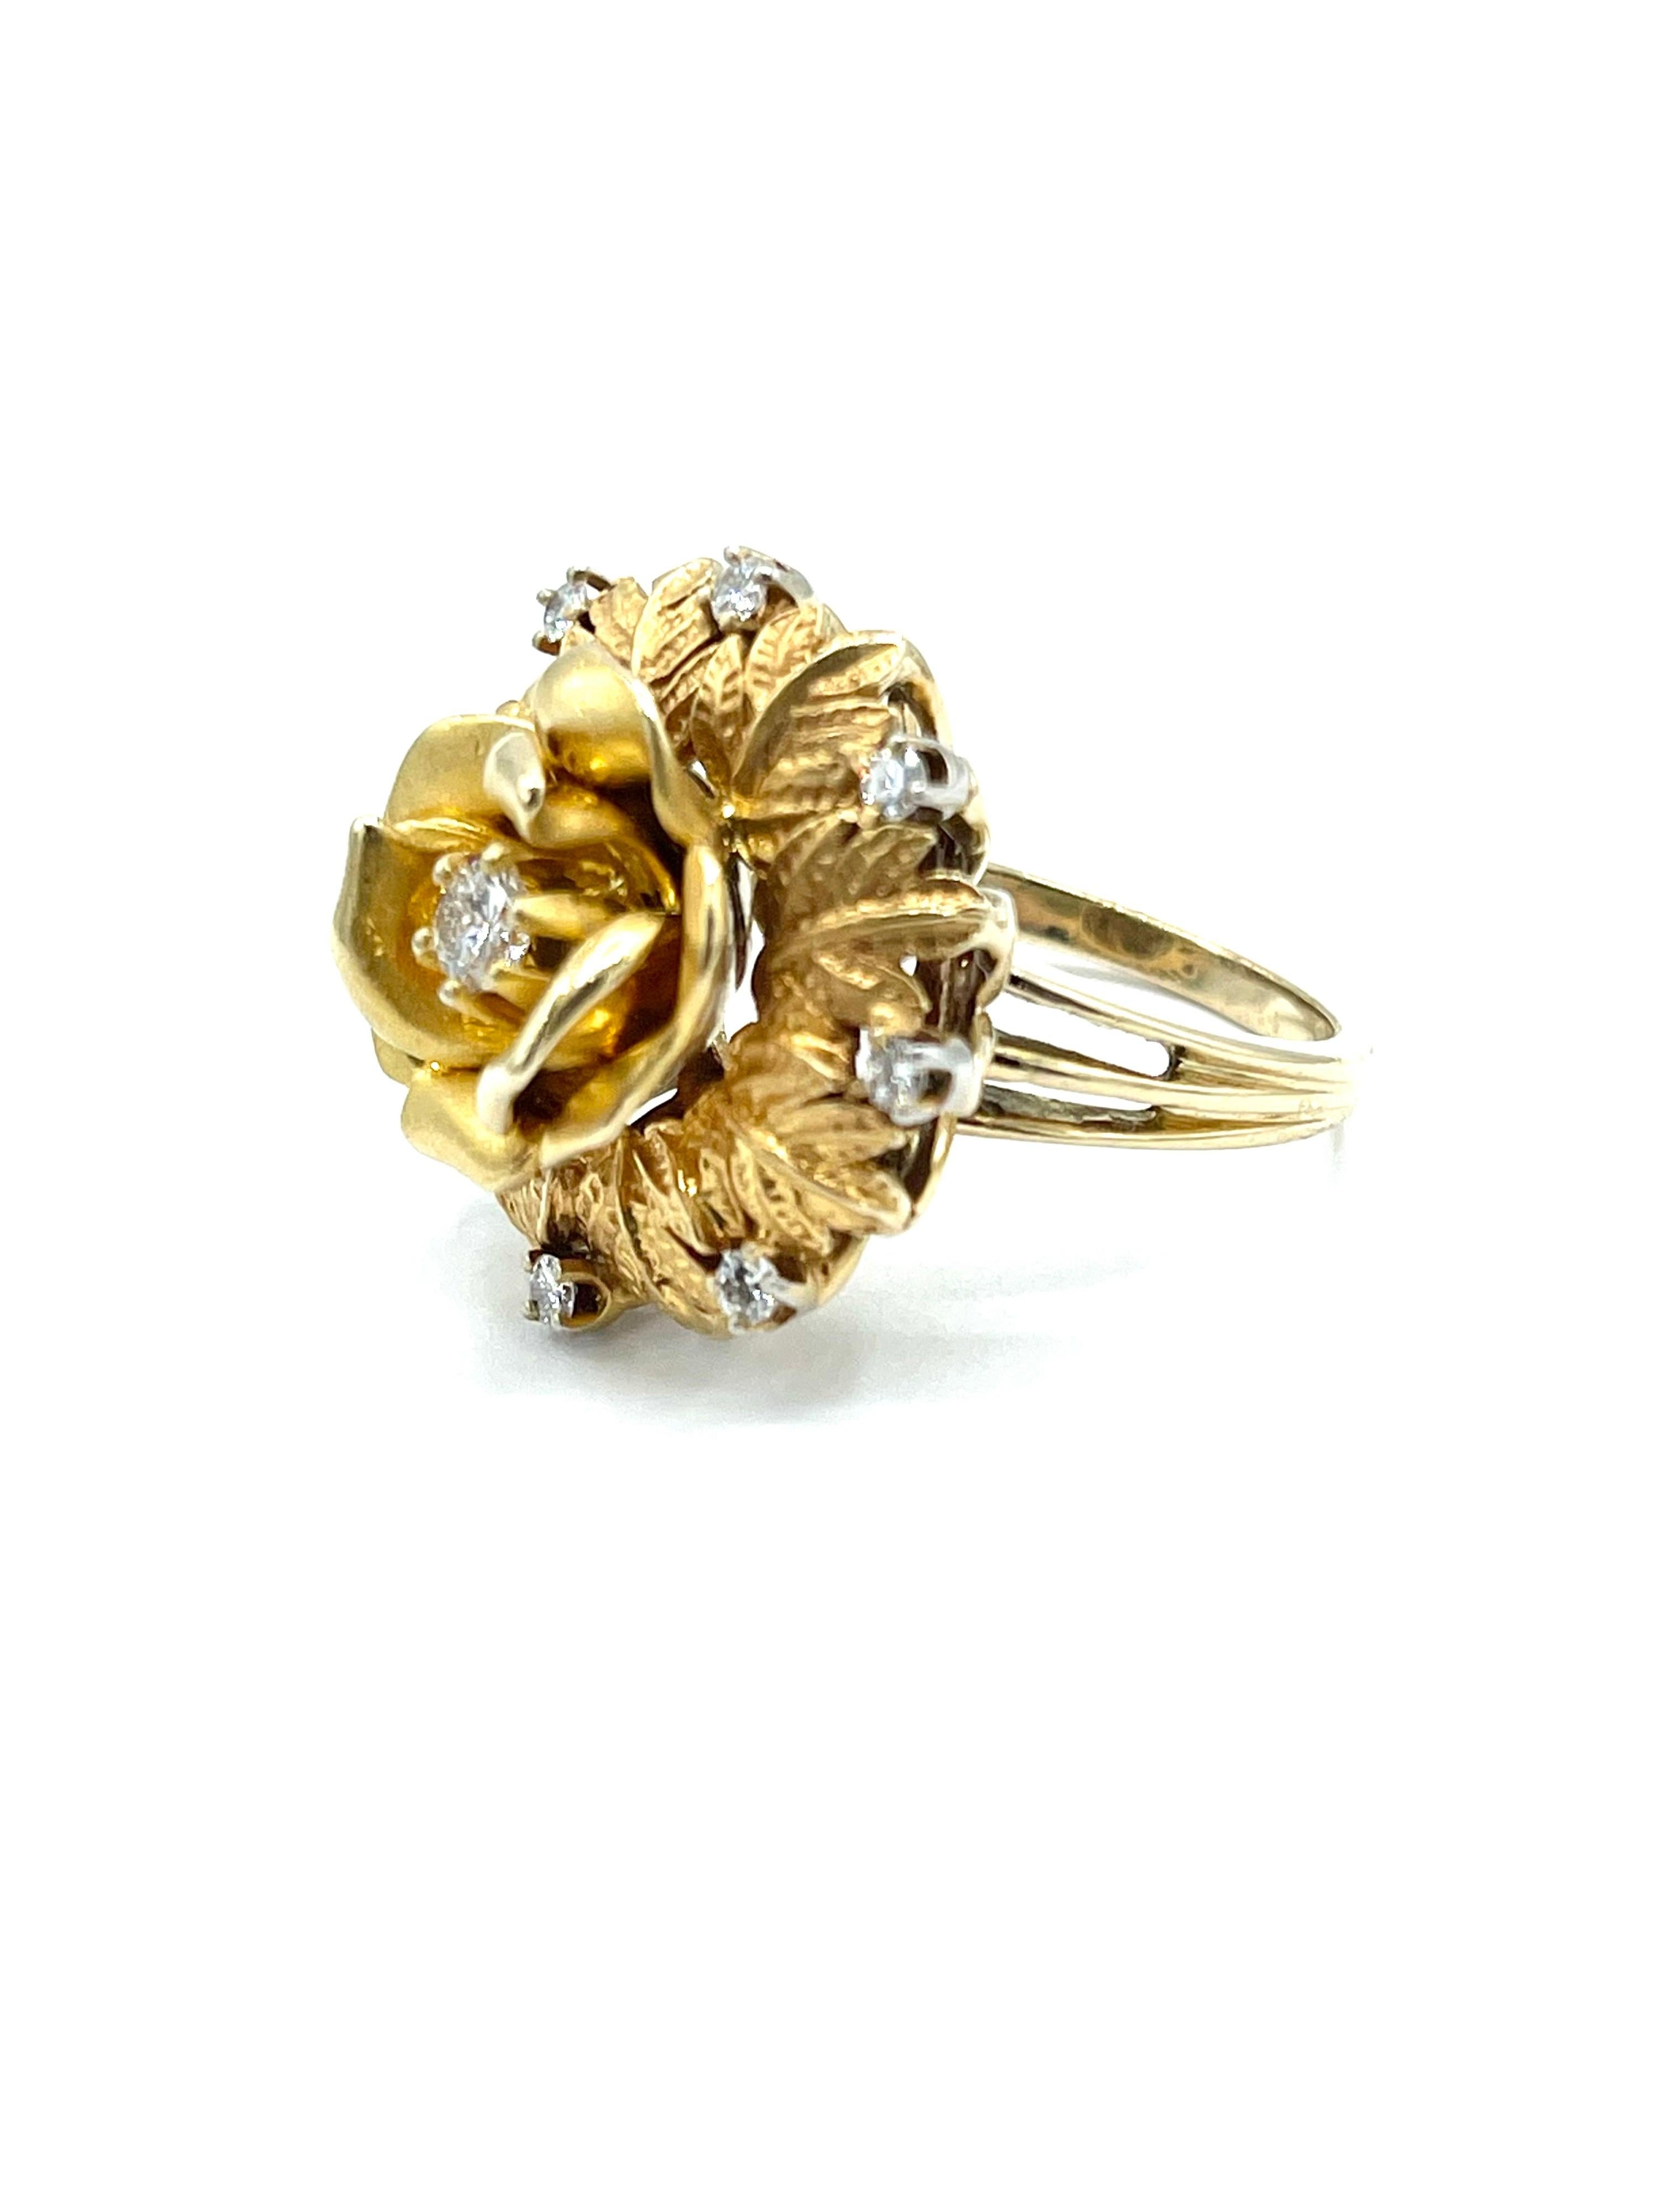 Round Cut 0.36 Carat Round Brilliant Diamond and Textured 18K Gold Flower Cocktail Ring For Sale